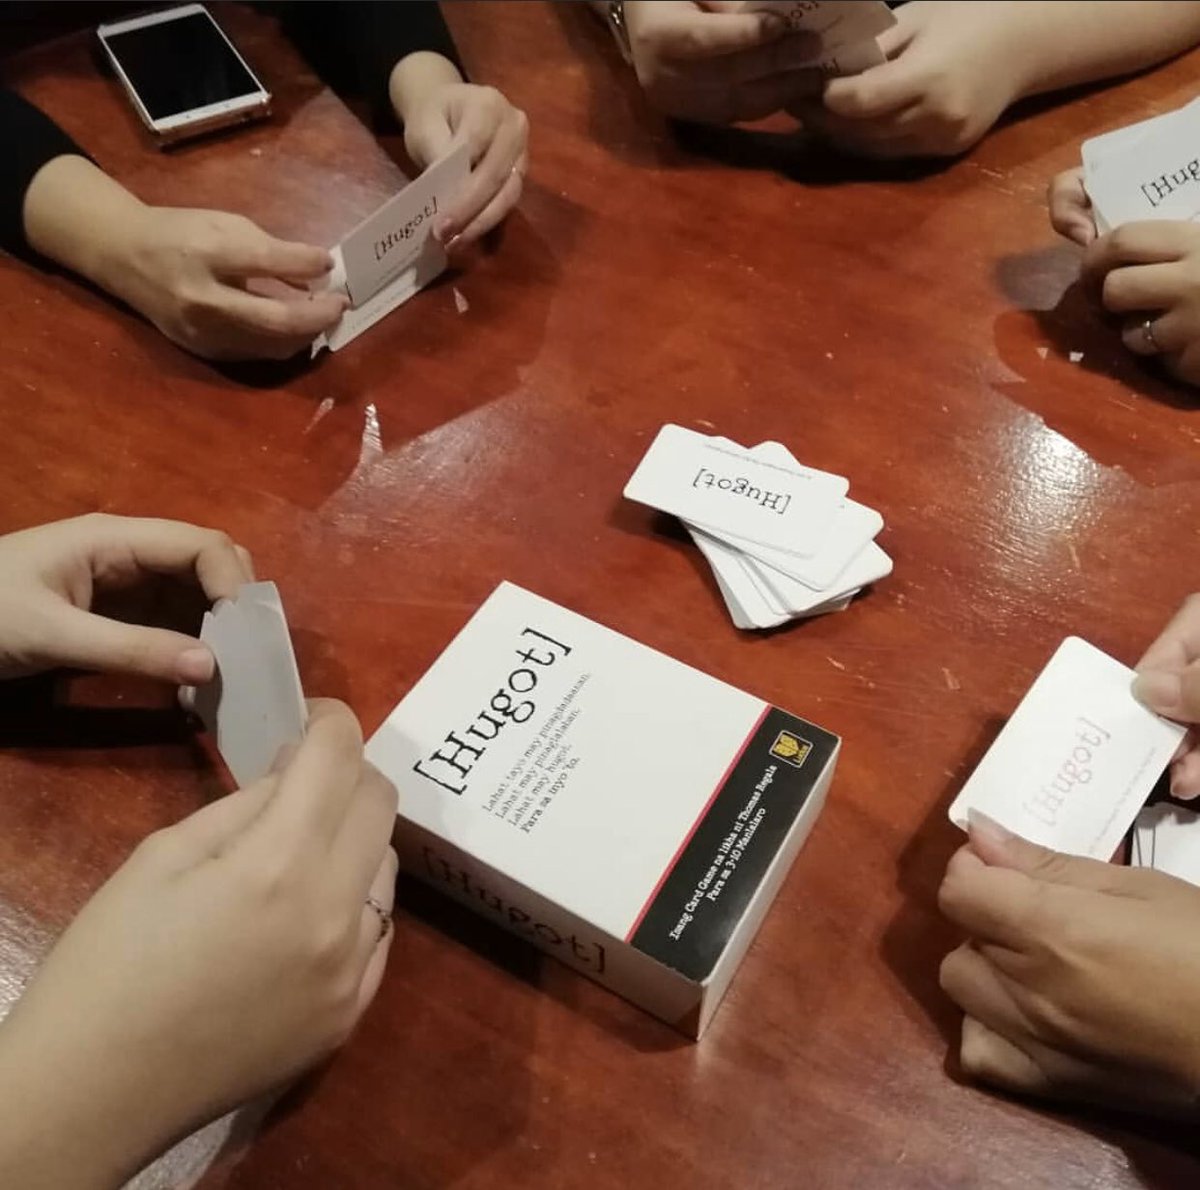 Hugot is basically Cards Against Humanity but Hugot! My first experience was with one of my exes (we still frens, yo!) which was hilarious. One of the best games to play with people who are just getting into games (we call them gateway games)Buy at local board game stores.